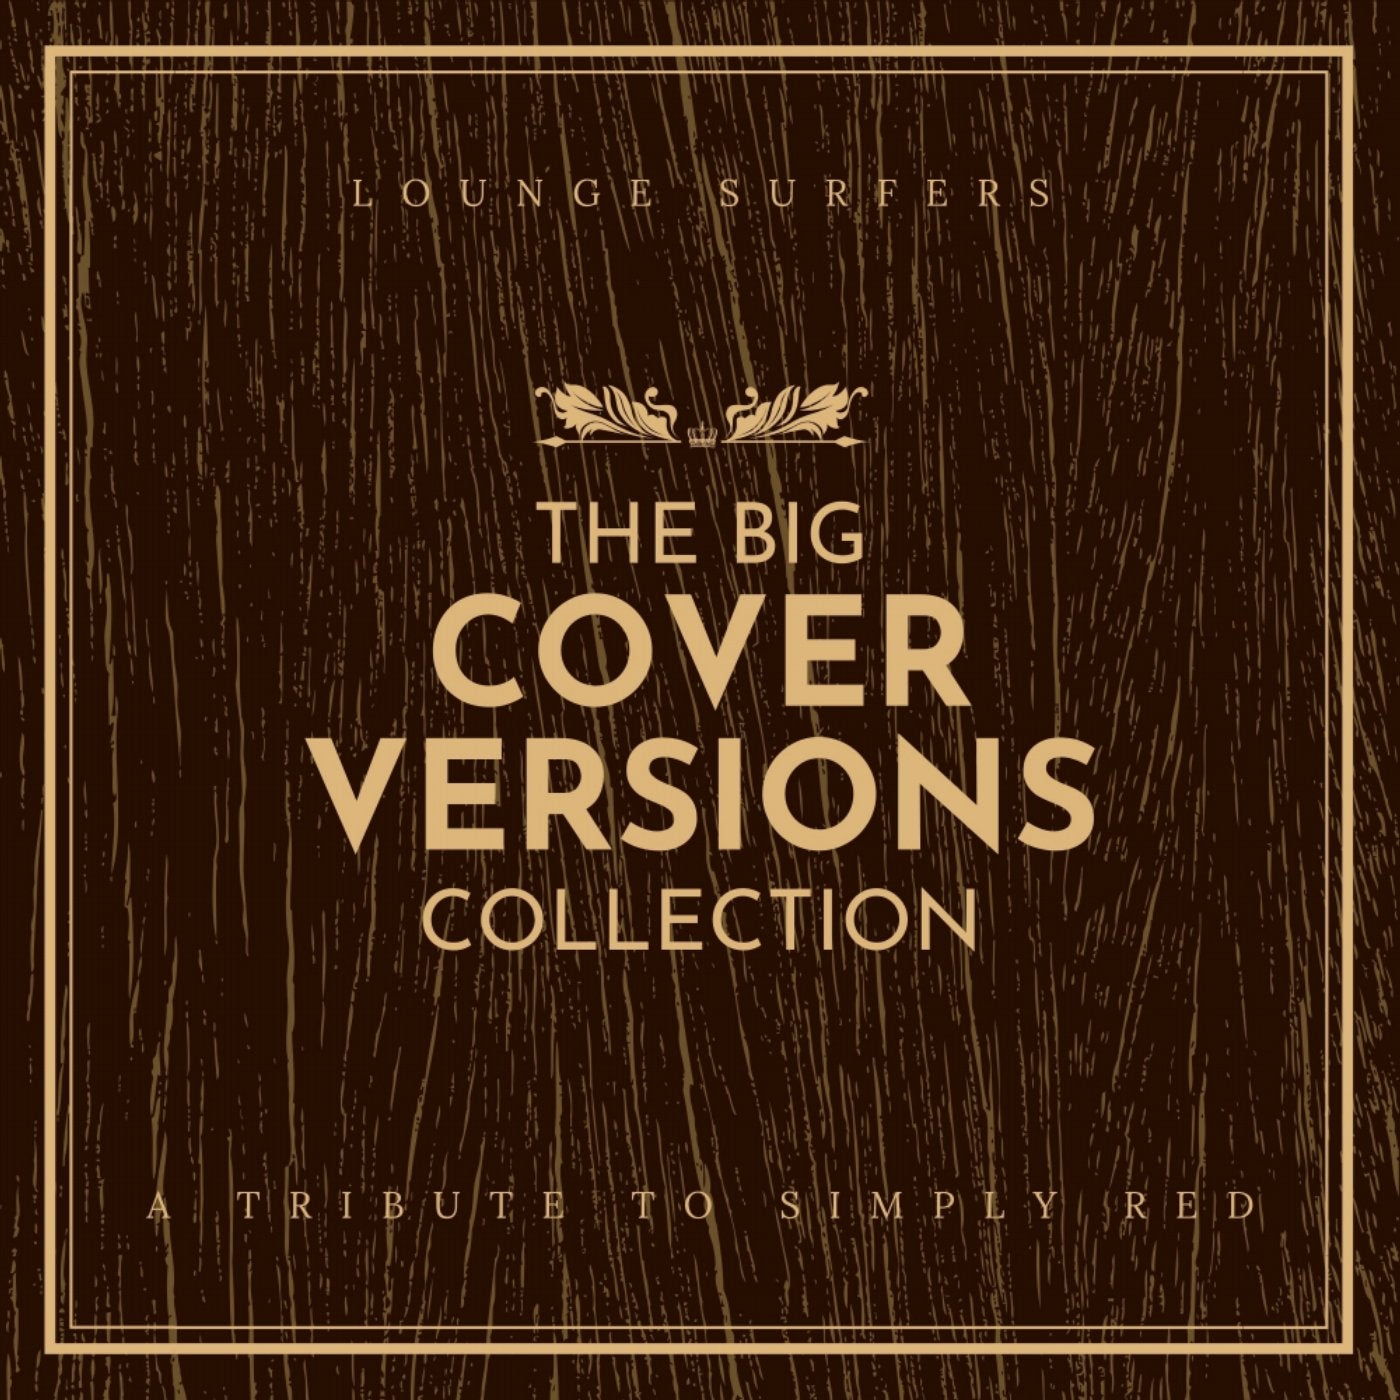 The Big Cover Versions Collection (A Tribute To Simply Red)